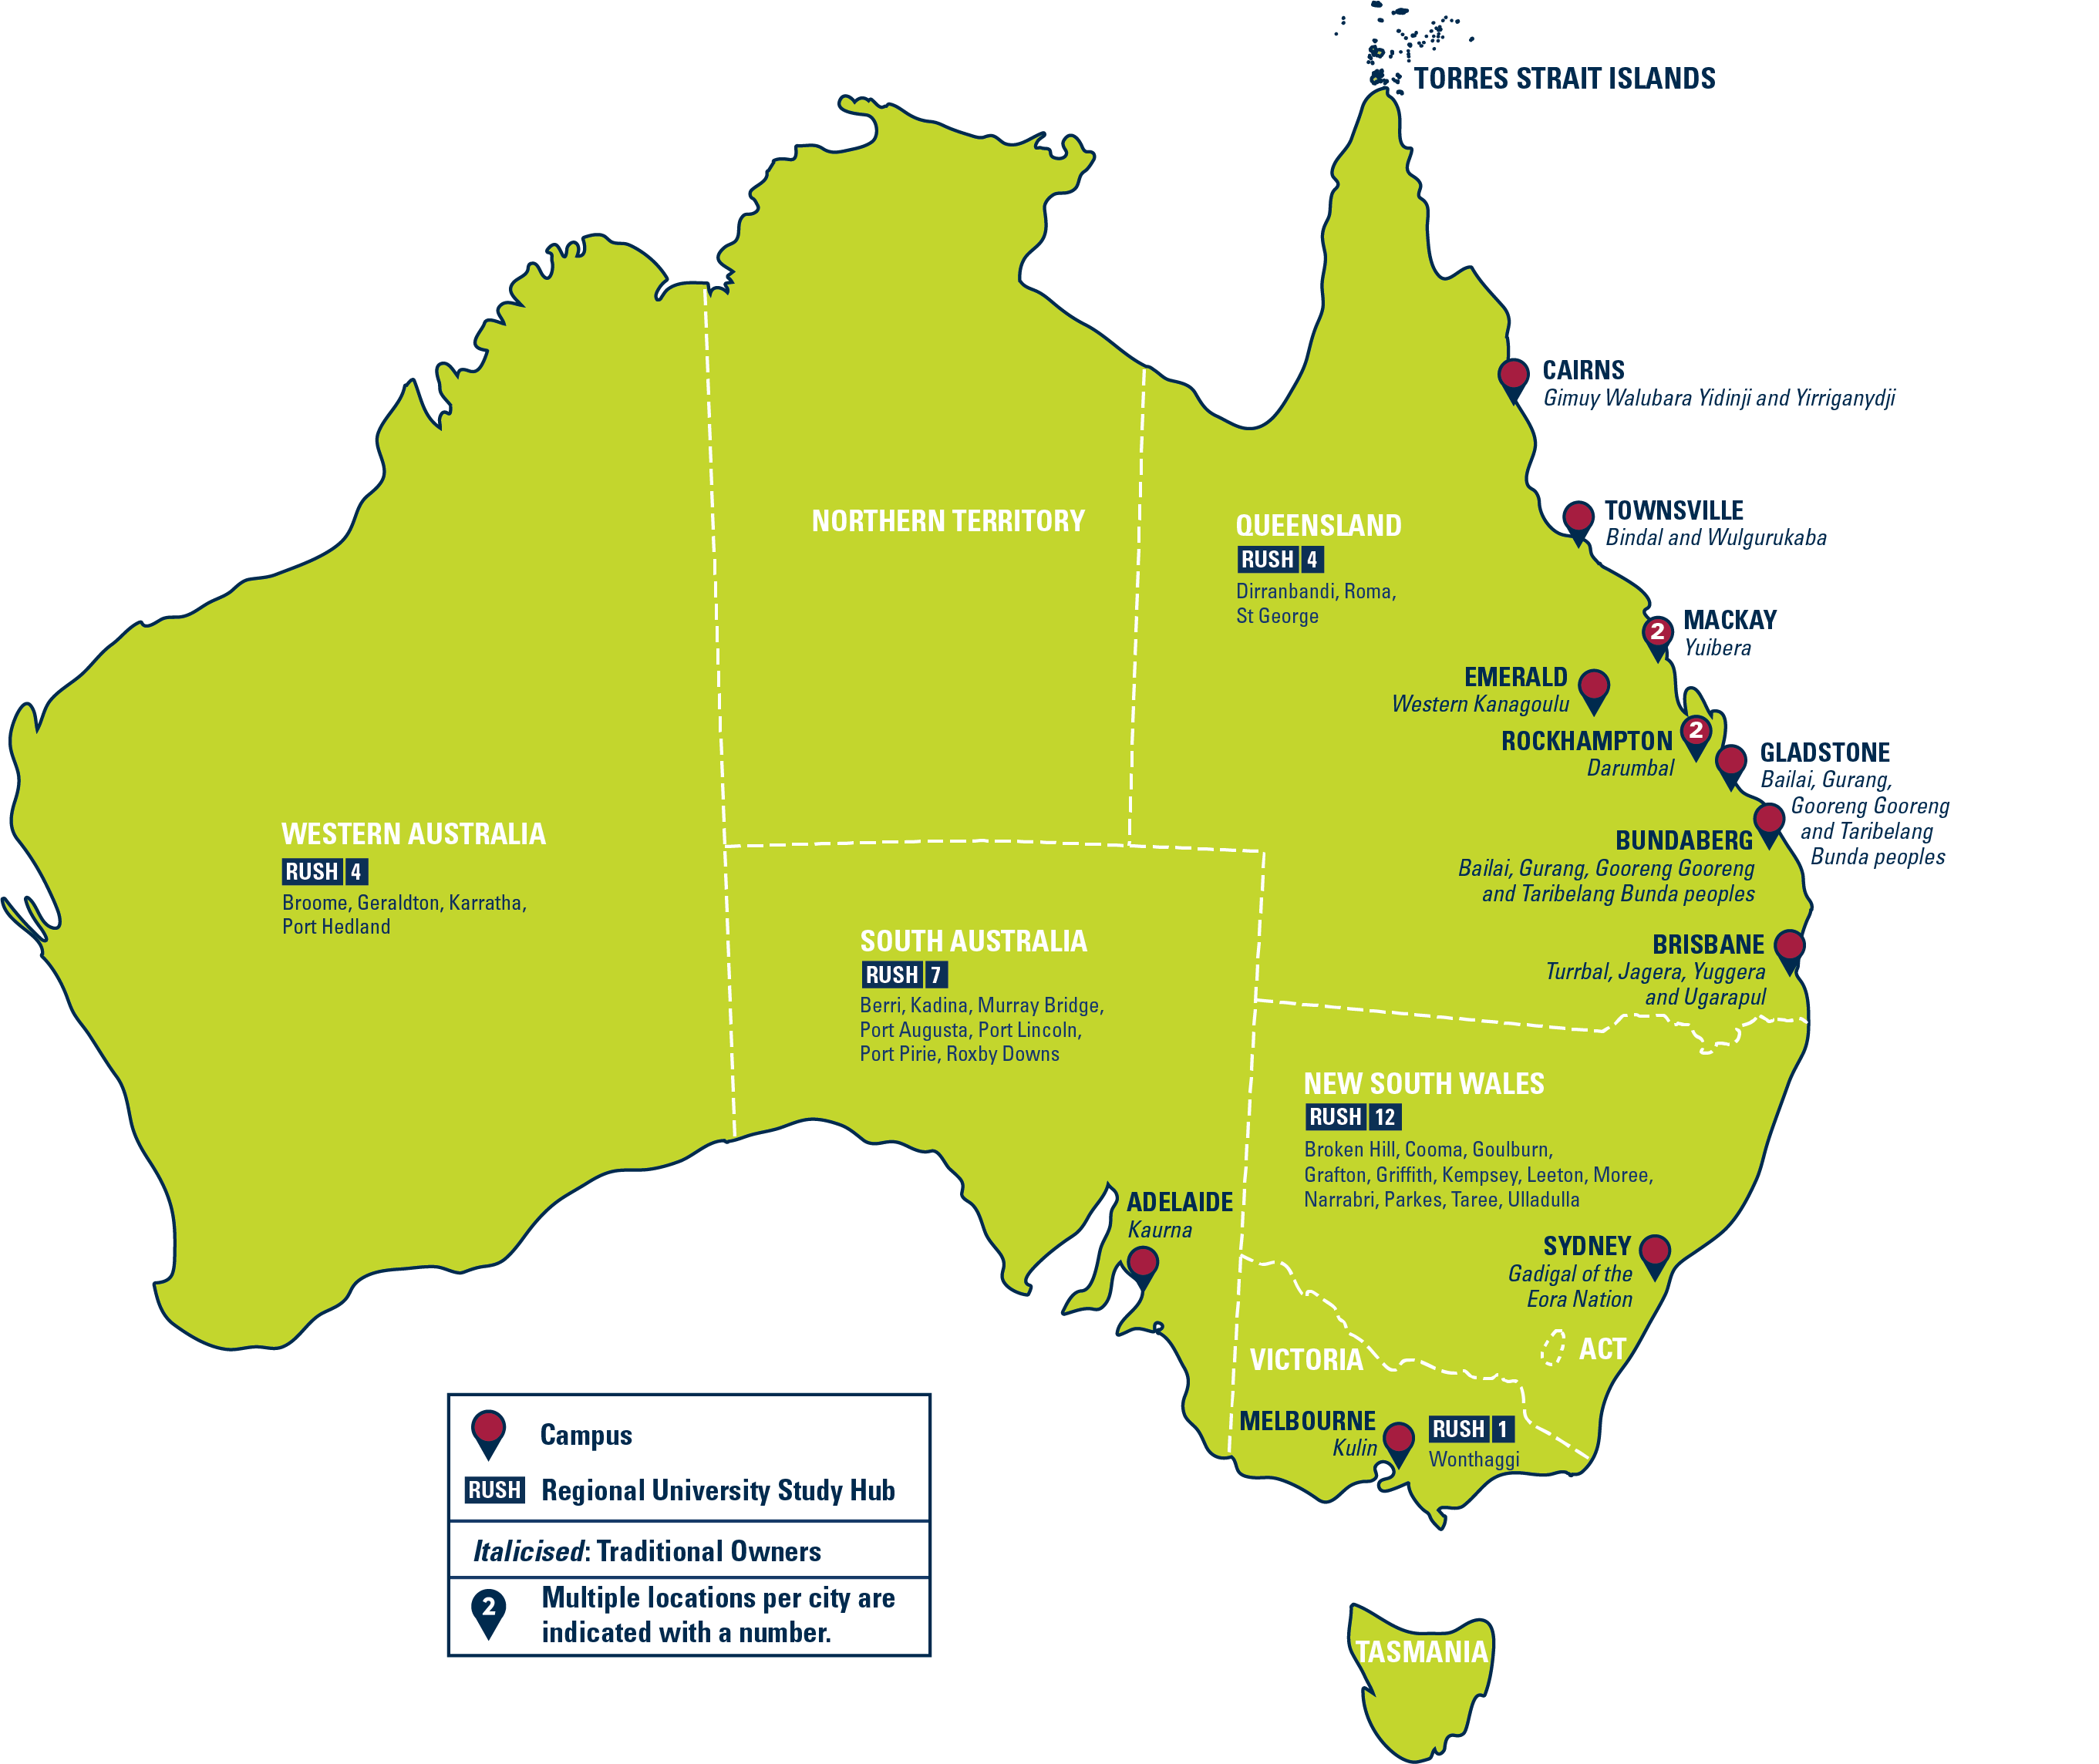 Map of Australia showing CQUniversity campus locations with traditional names